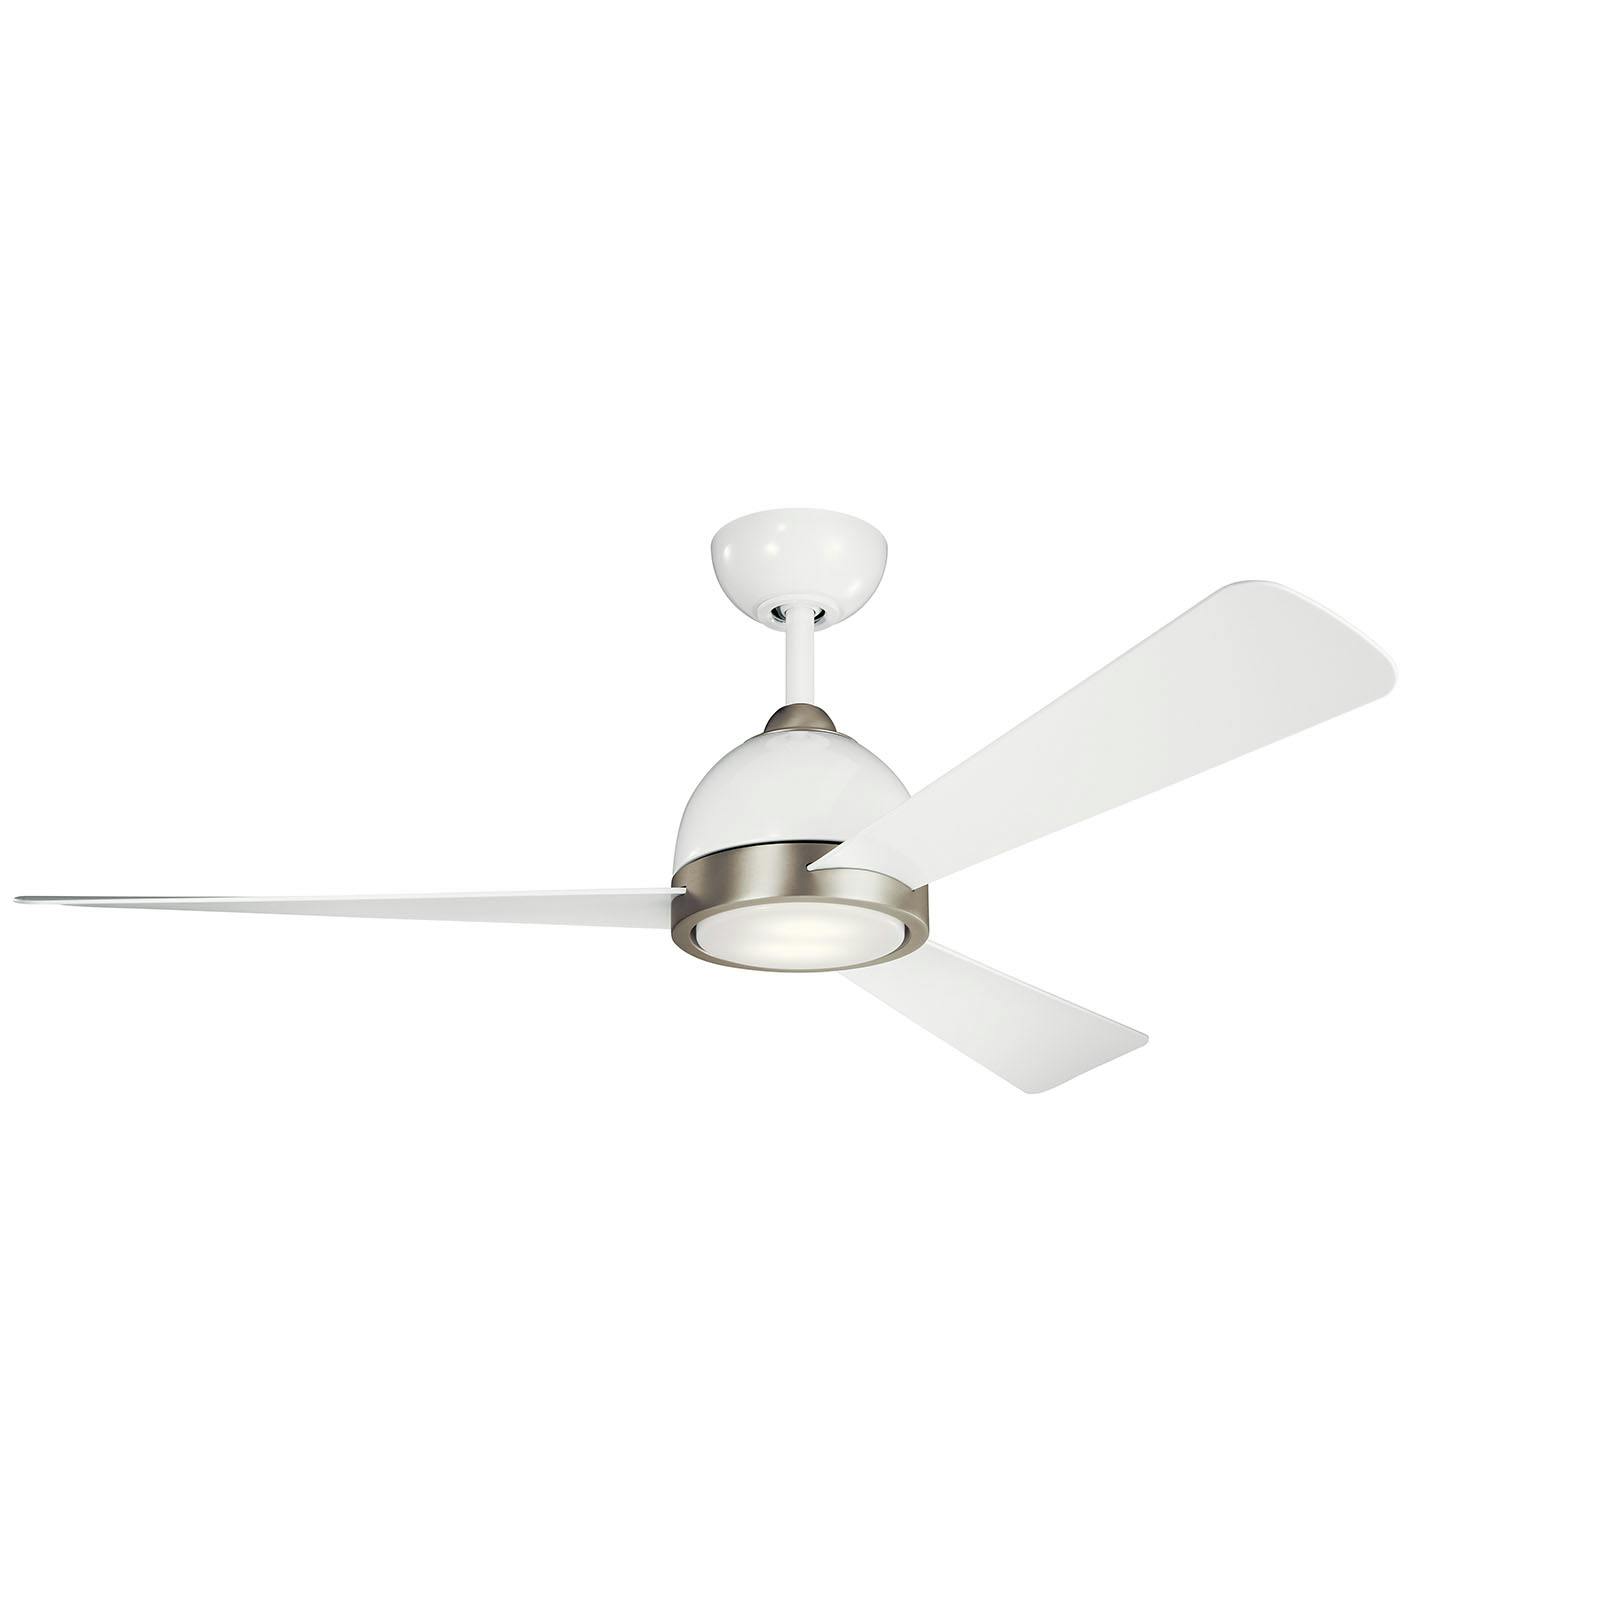 Incus LED 56" Ceiling Fan White finish on a white background